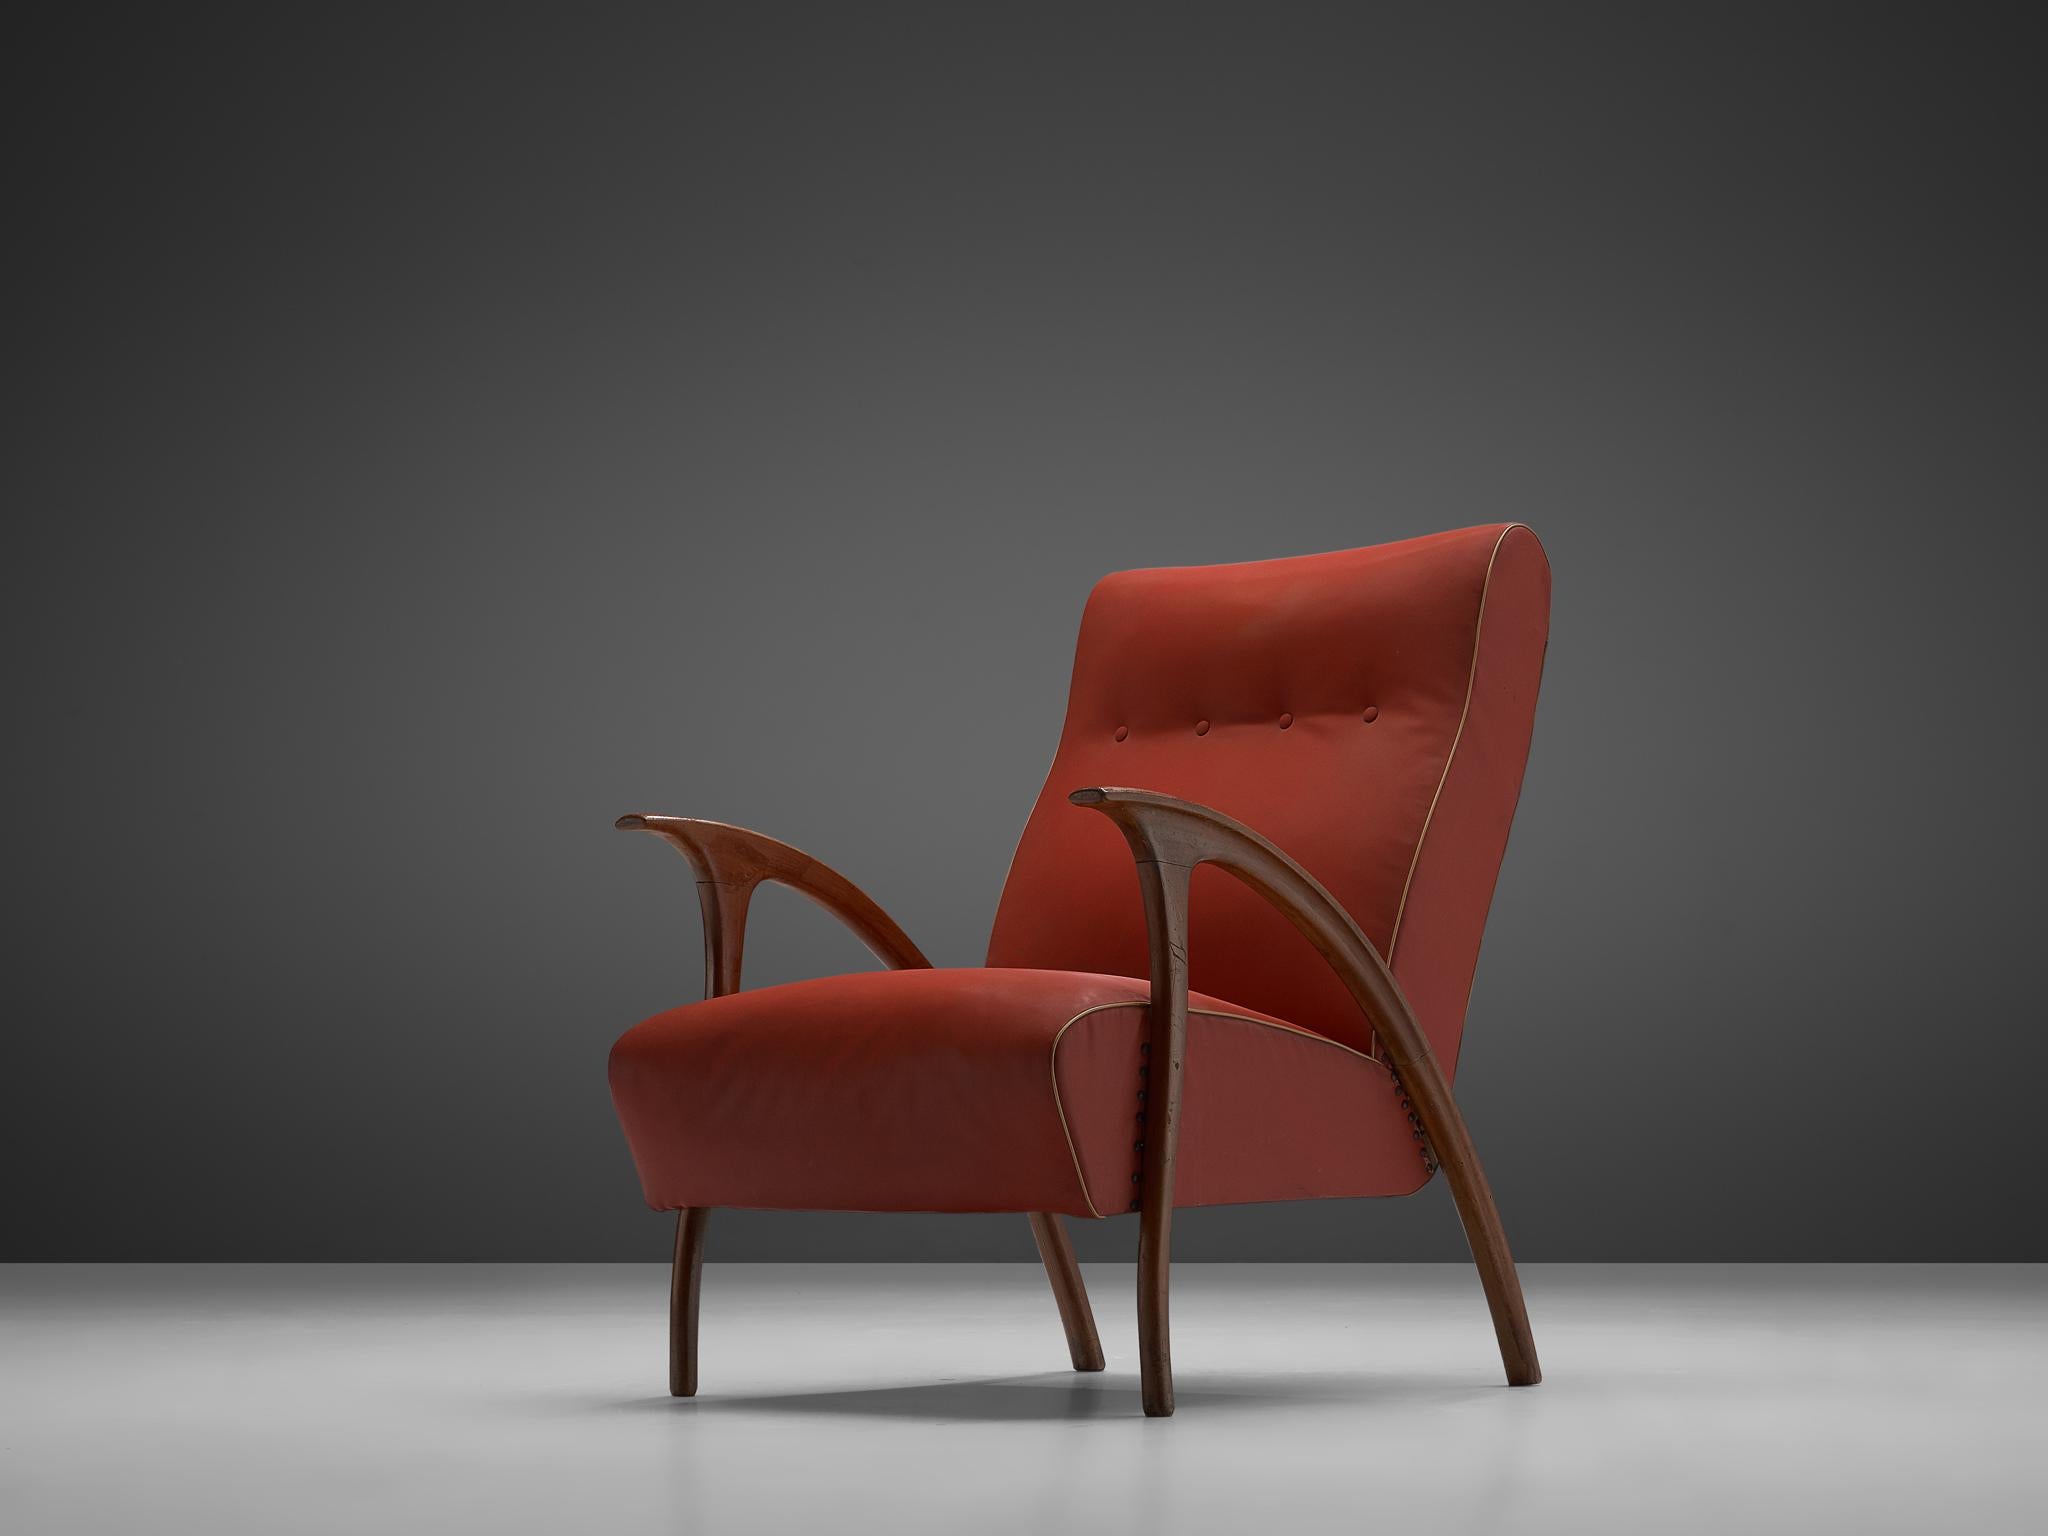 Easy chair, walnut, red leatherette , Italy 1960s.

Beautiful Italian armchair in walnut created in the 1960s. The chair features a gorgeous, sculptural frame with gracious forms. Therefore, the armrests make a grand gesture in their curve. The seat